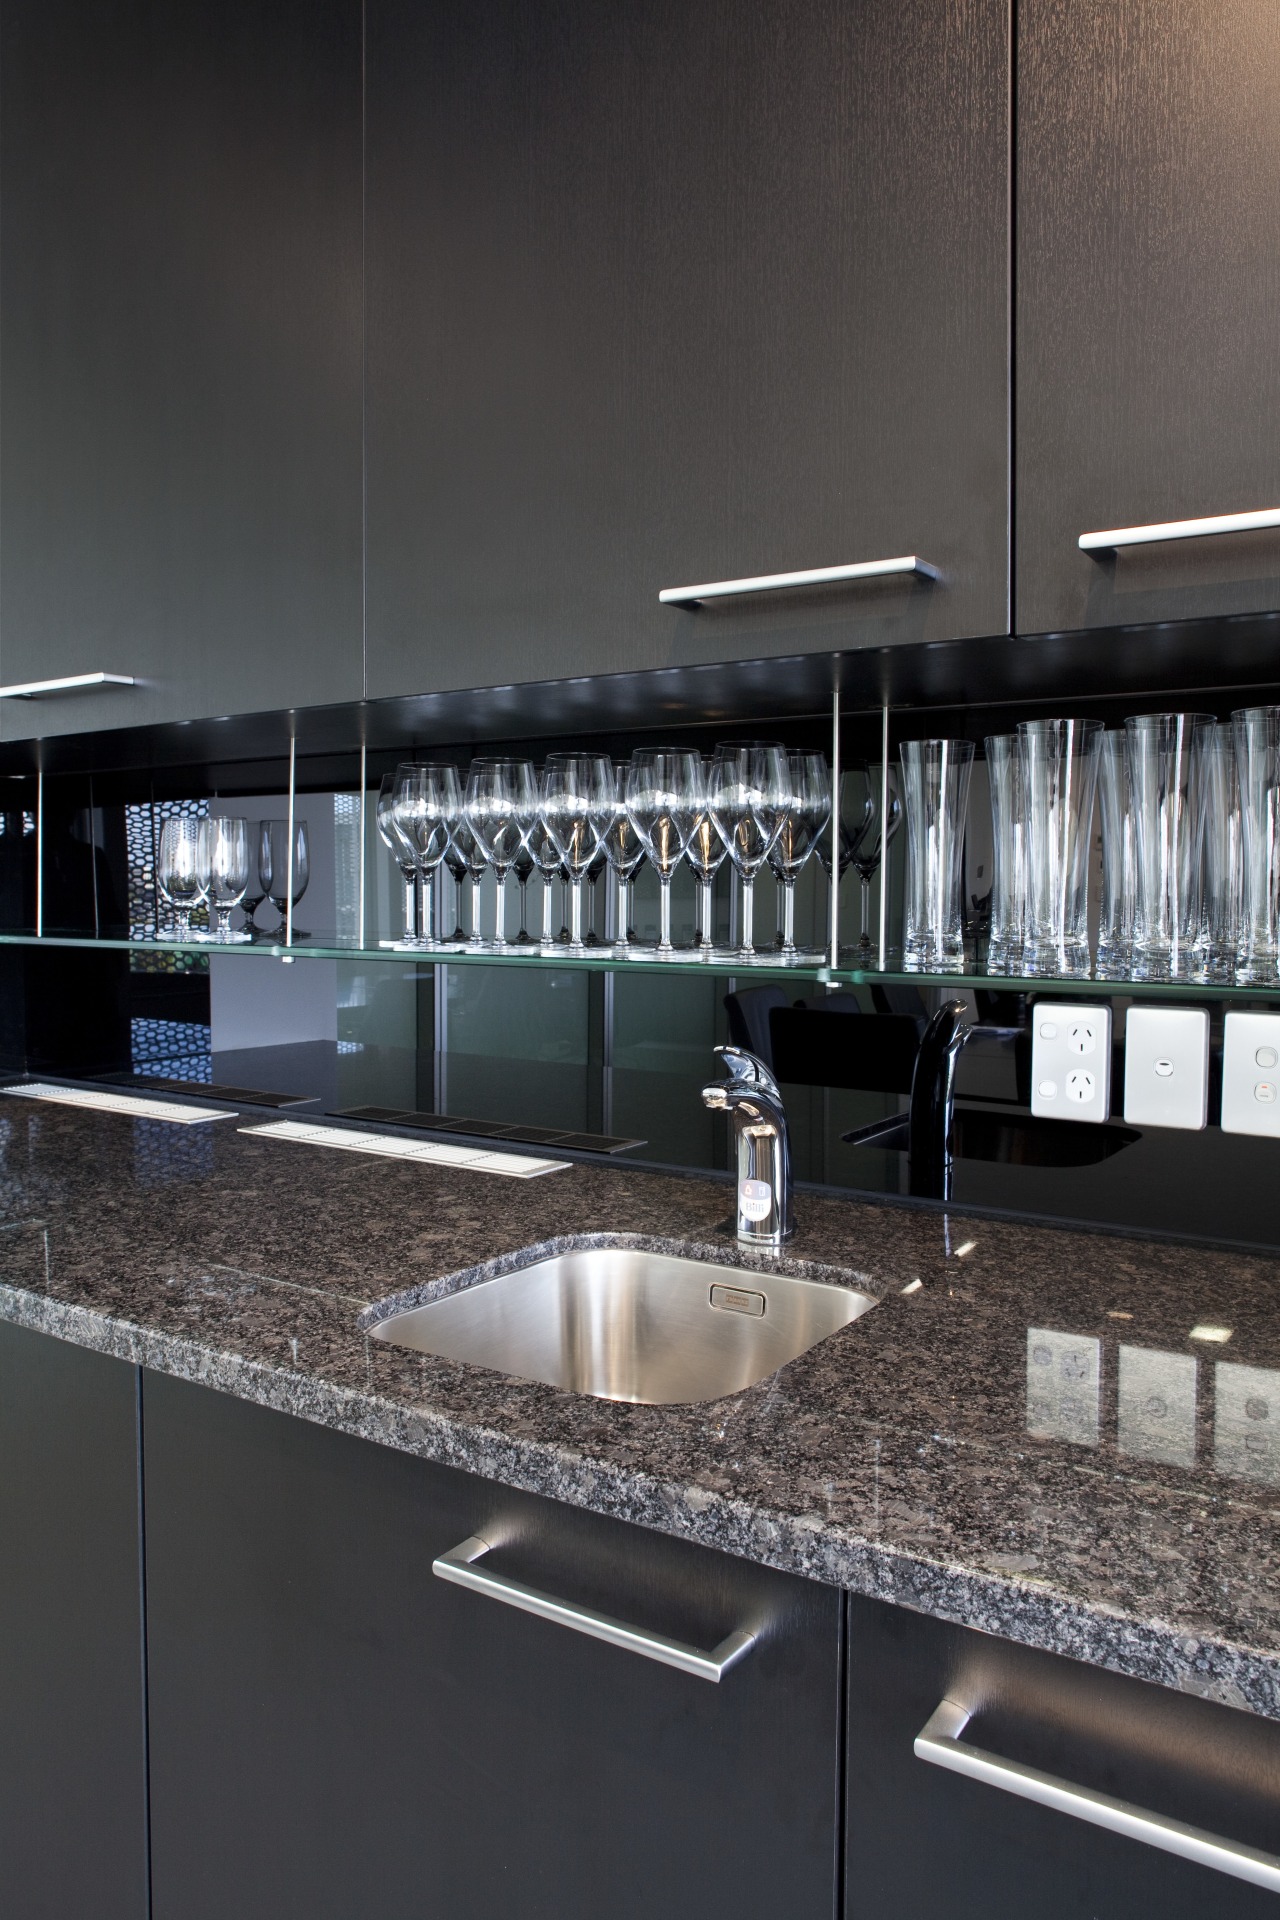 Seen here is a drinking-water system designed by countertop, glass, interior design, kitchen, lighting, under cabinet lighting, black